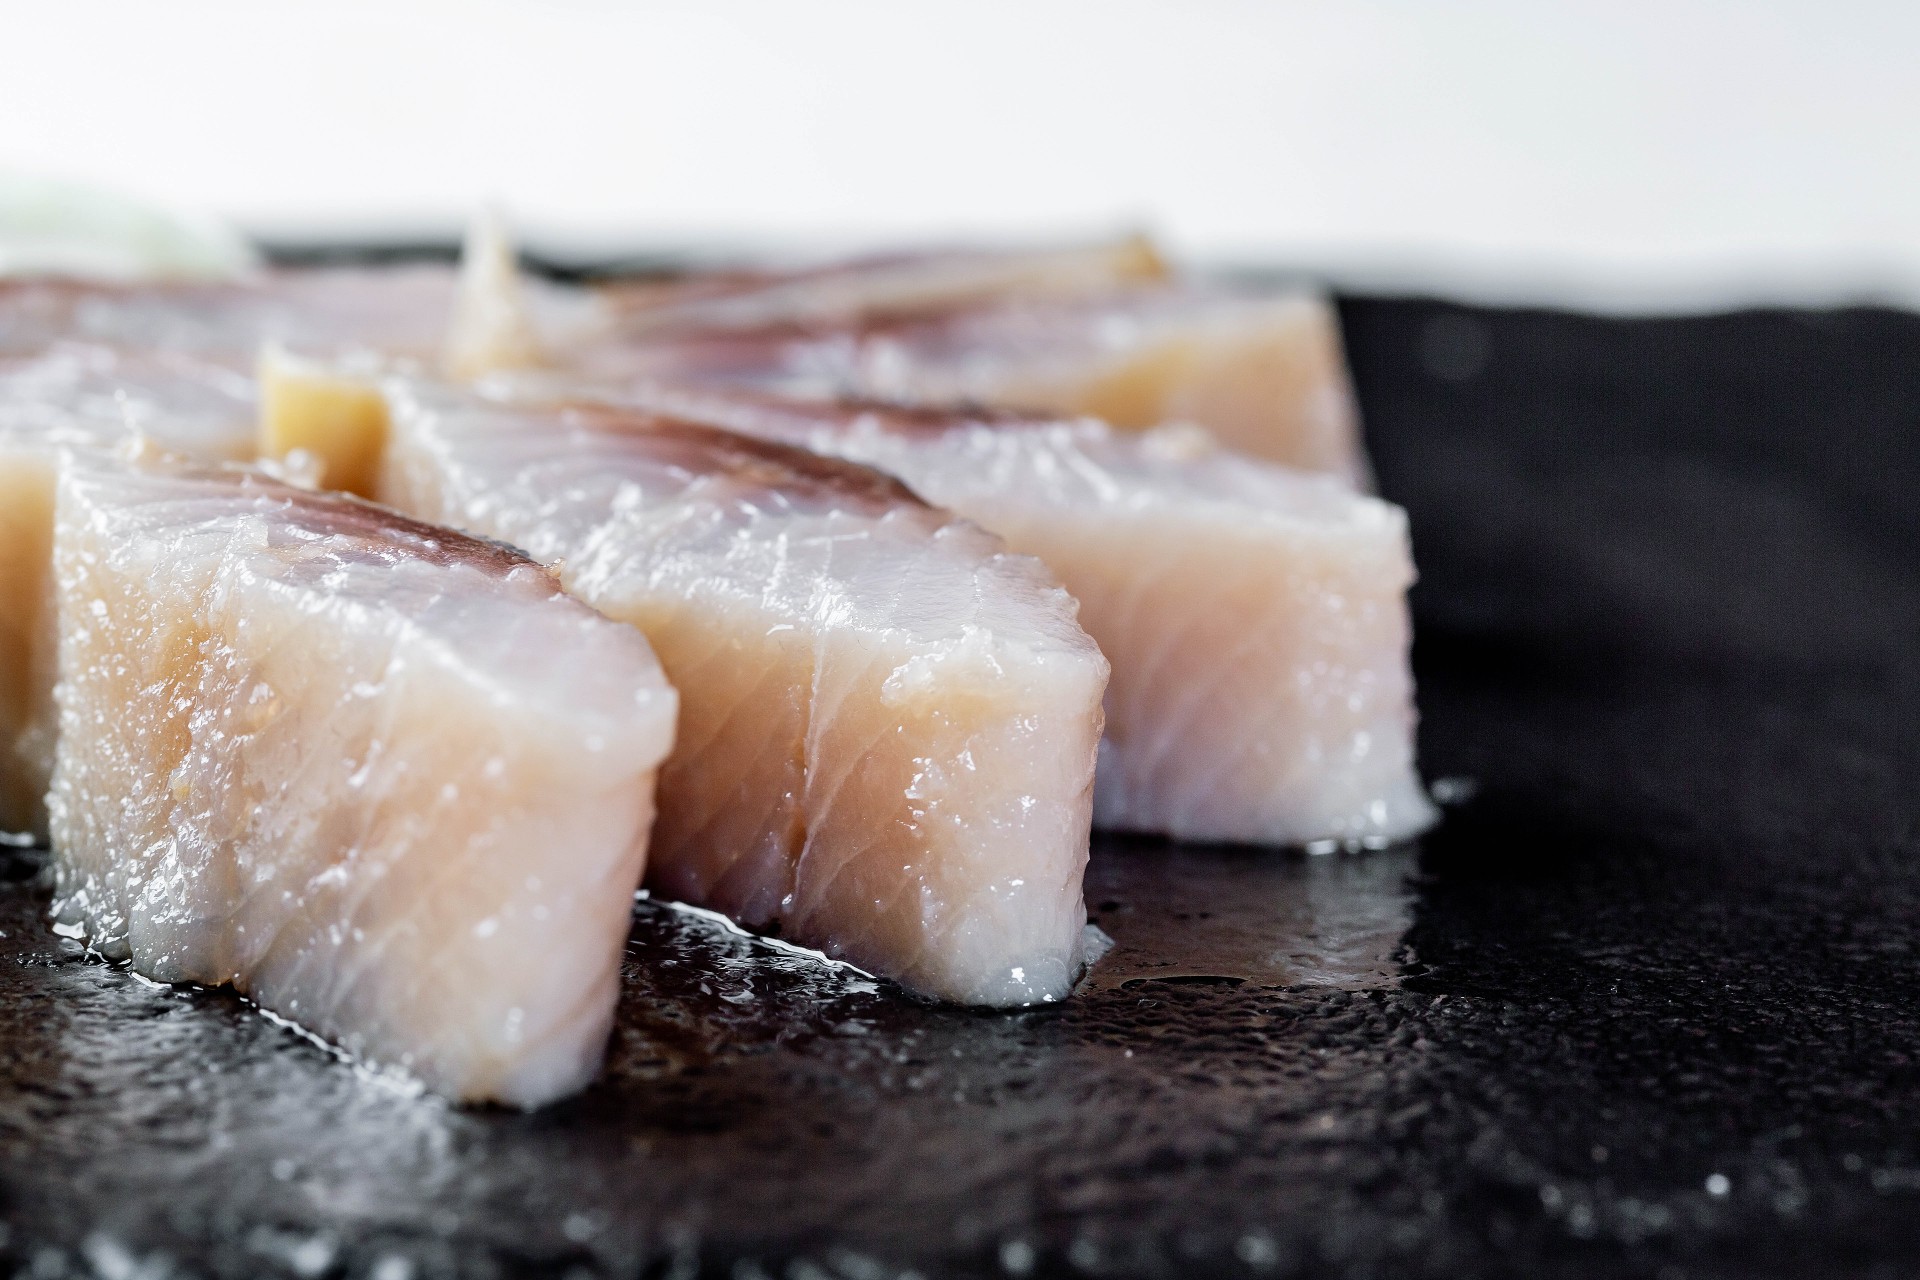 Best Fish to Eat: 12 Healthiest Options